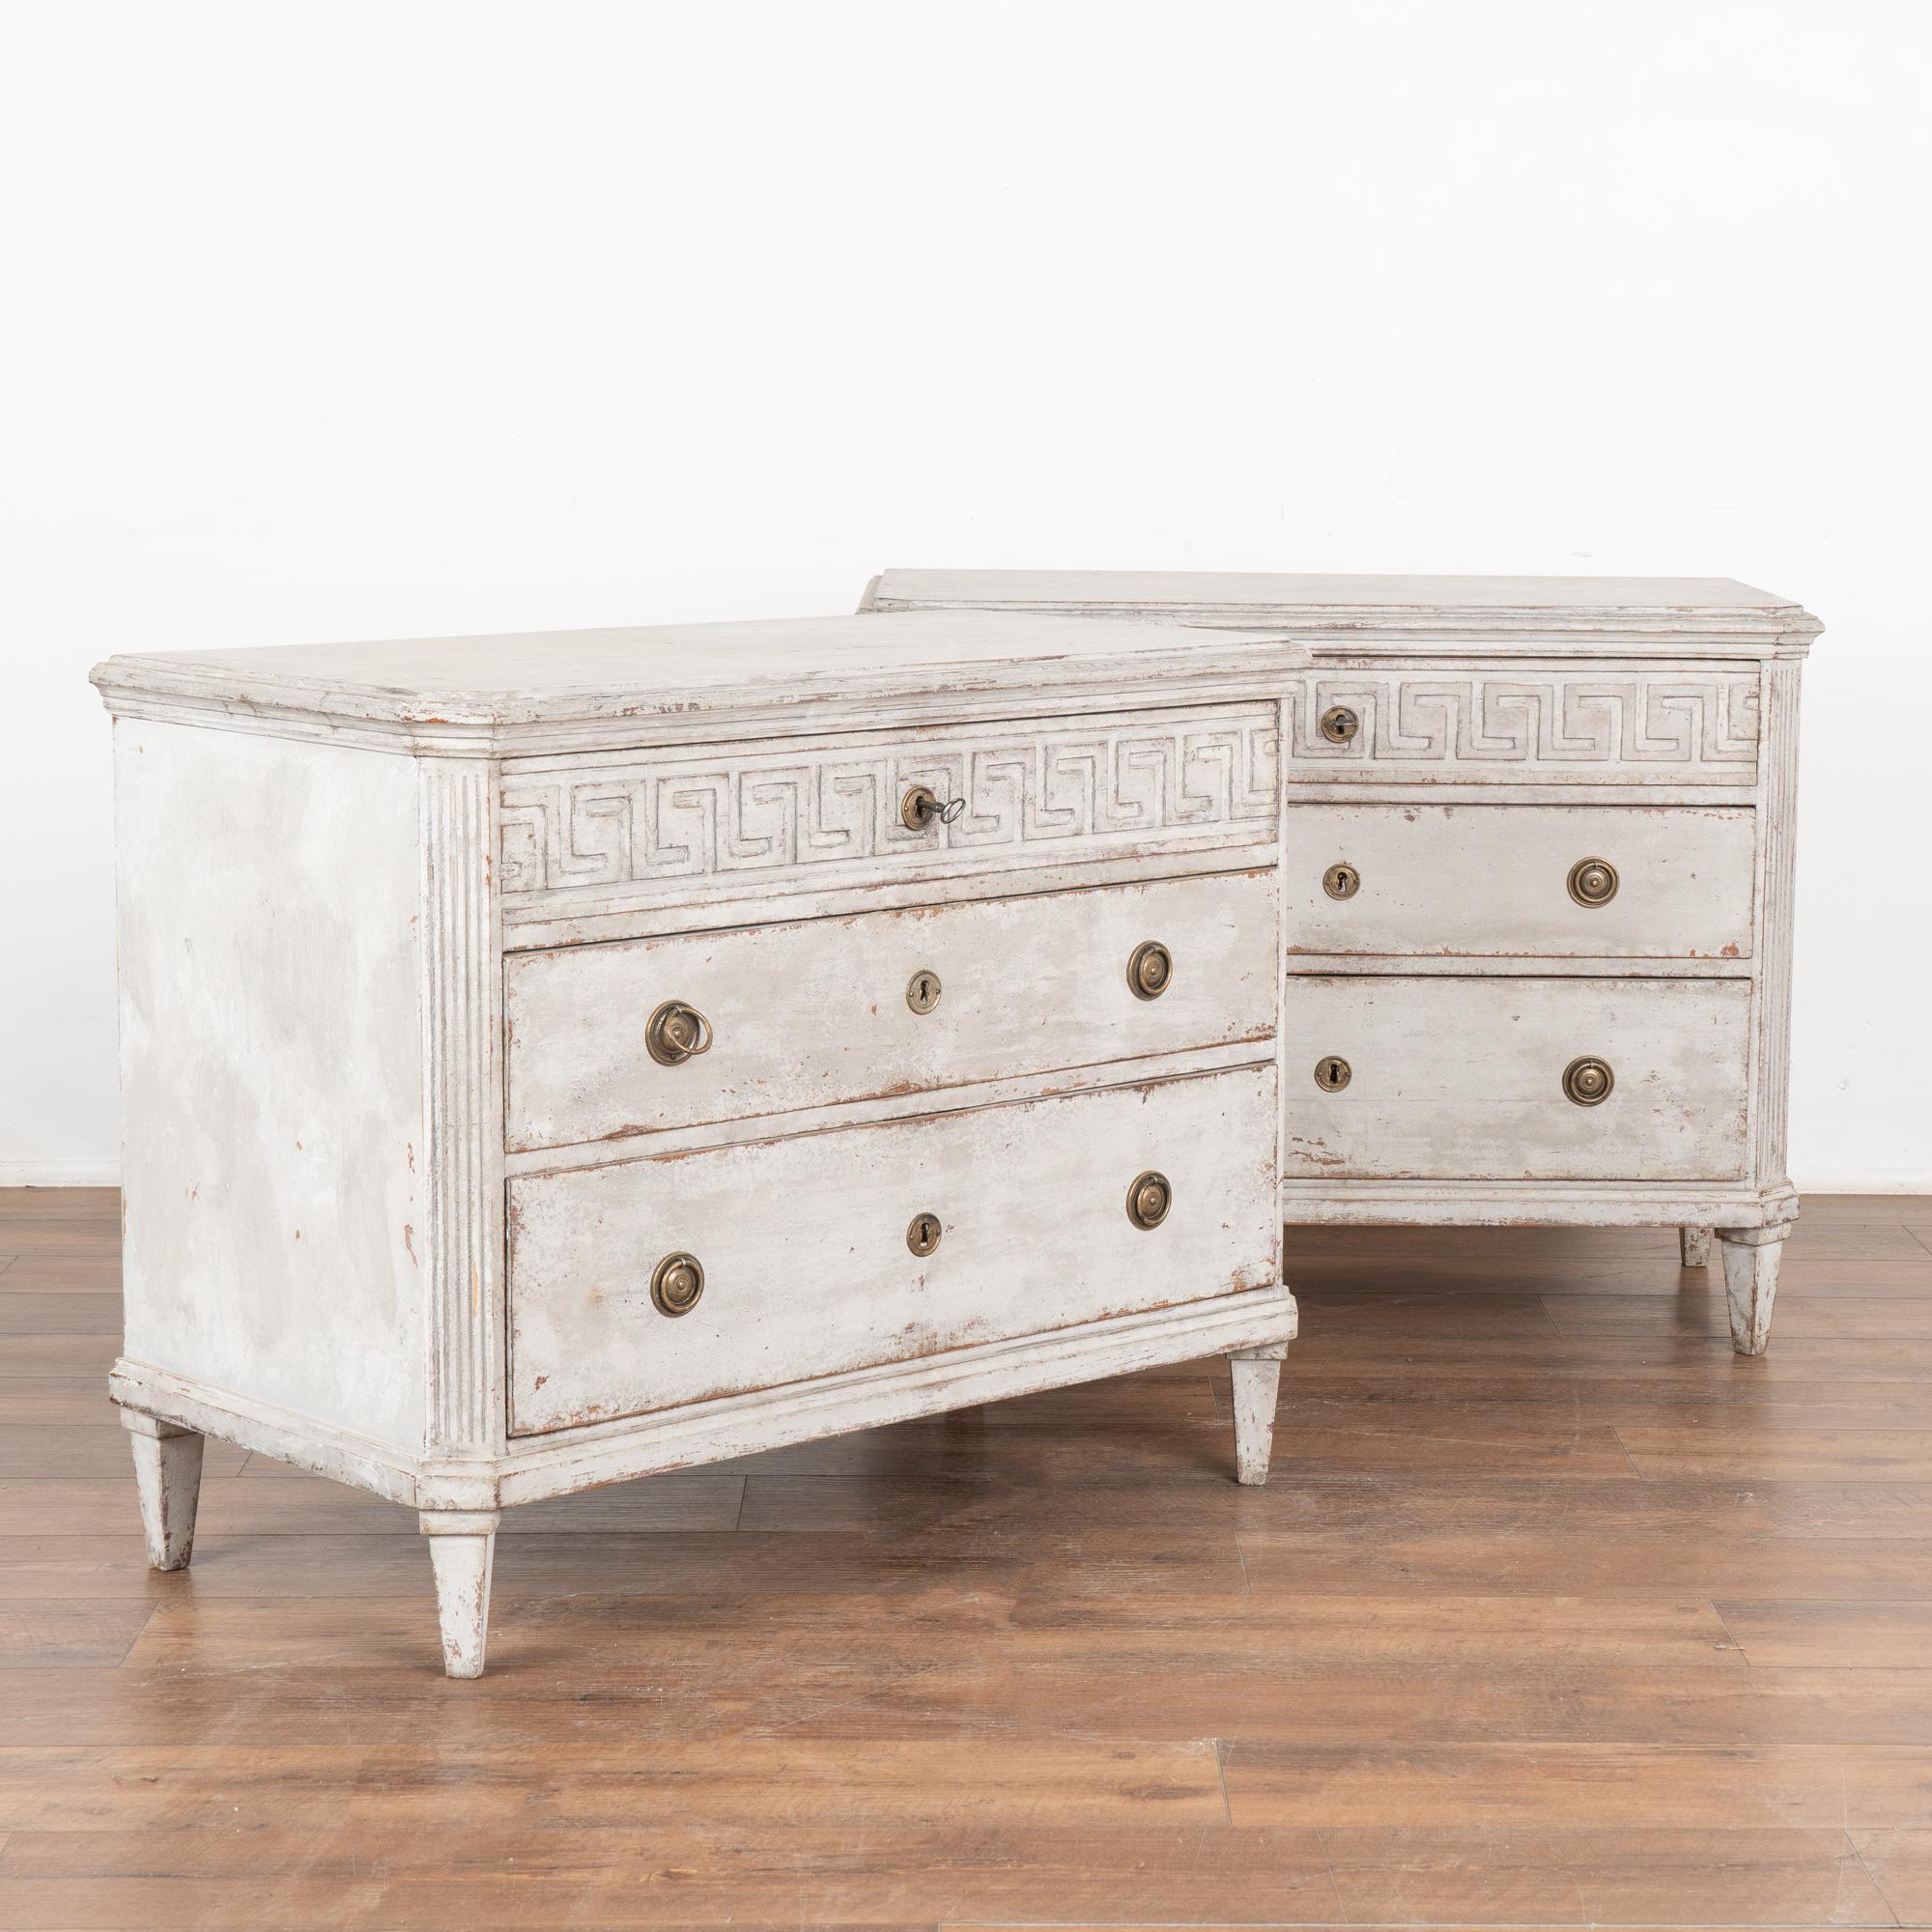 A pair of decorative Gustavian pine chest of drawers with Greek key motif carved in upper drawer.
Canted fluted side posts, 3 drawers resting on four tapered feet.
The newer, professionally applied gray custom painted finish is perfectly distressed